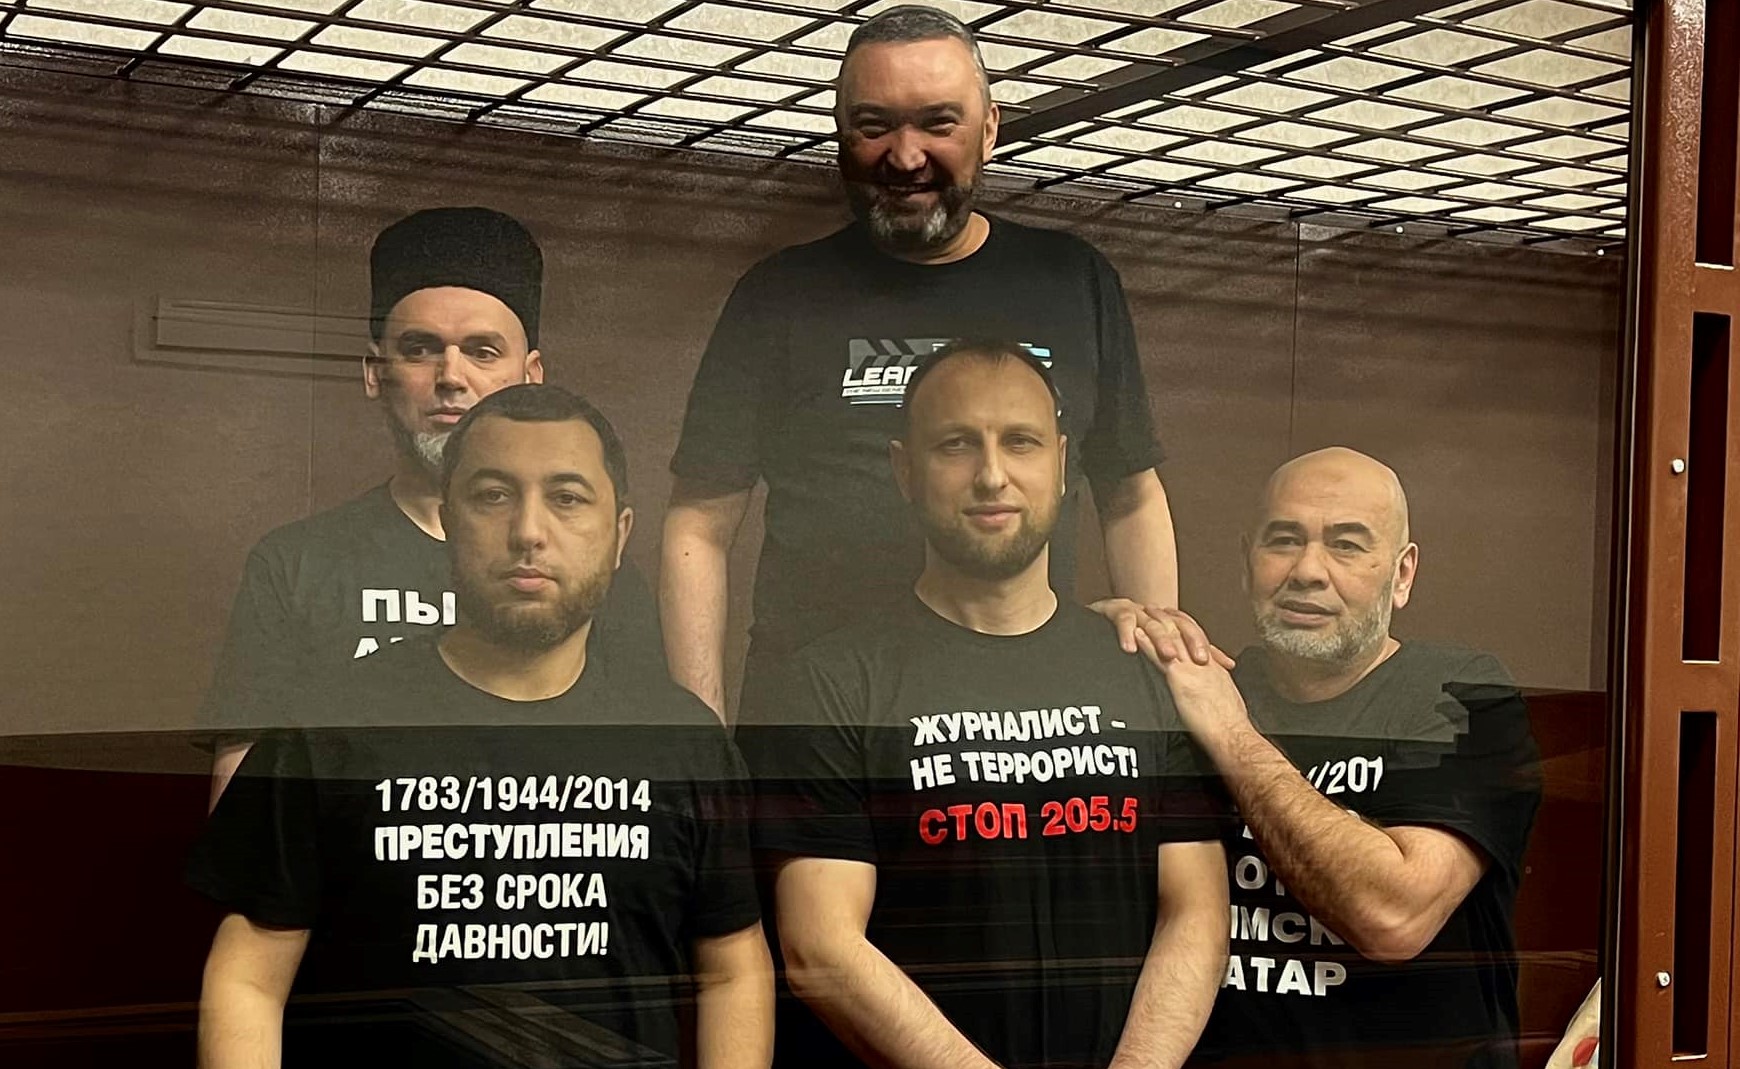 From back left clockwise Rustem Sheikhaliev, Enver Ametov, Yashar Muyedinov, Ruslan Suleimanov and Osman Arifmemetov The men’s T-shirts say, for example, that ’A journalist is not a terrorist’ and speak of the lies with no time bar of 1783, 1944 and 2014 Photo Crimean Solidarity